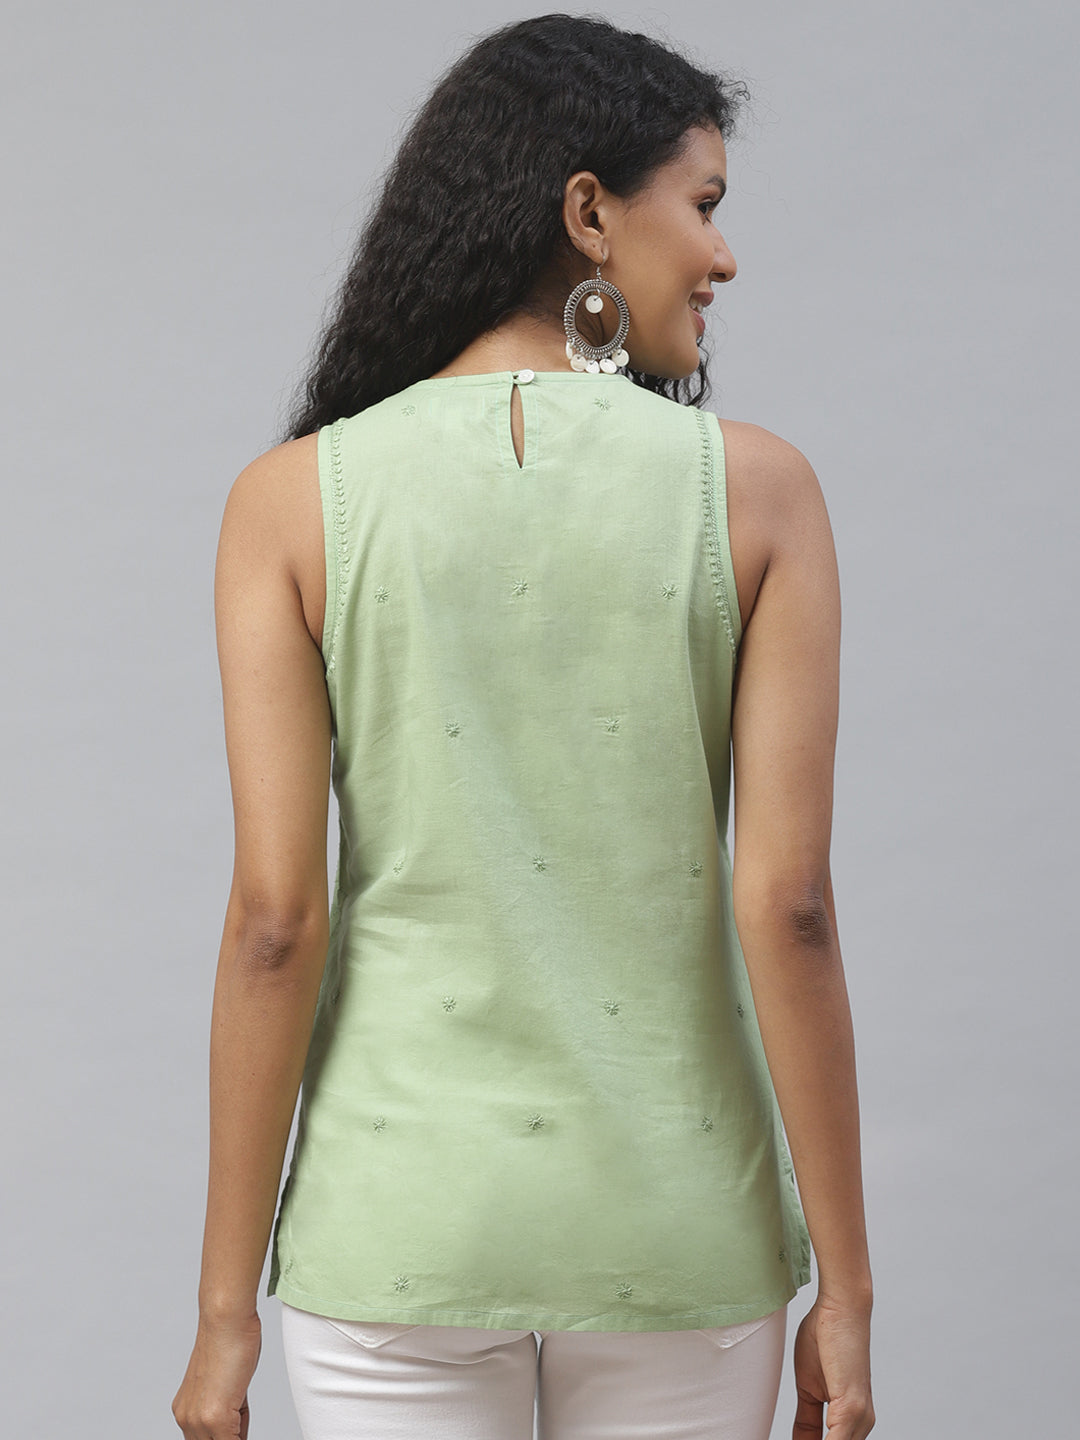 Pista Green Embroidered Top